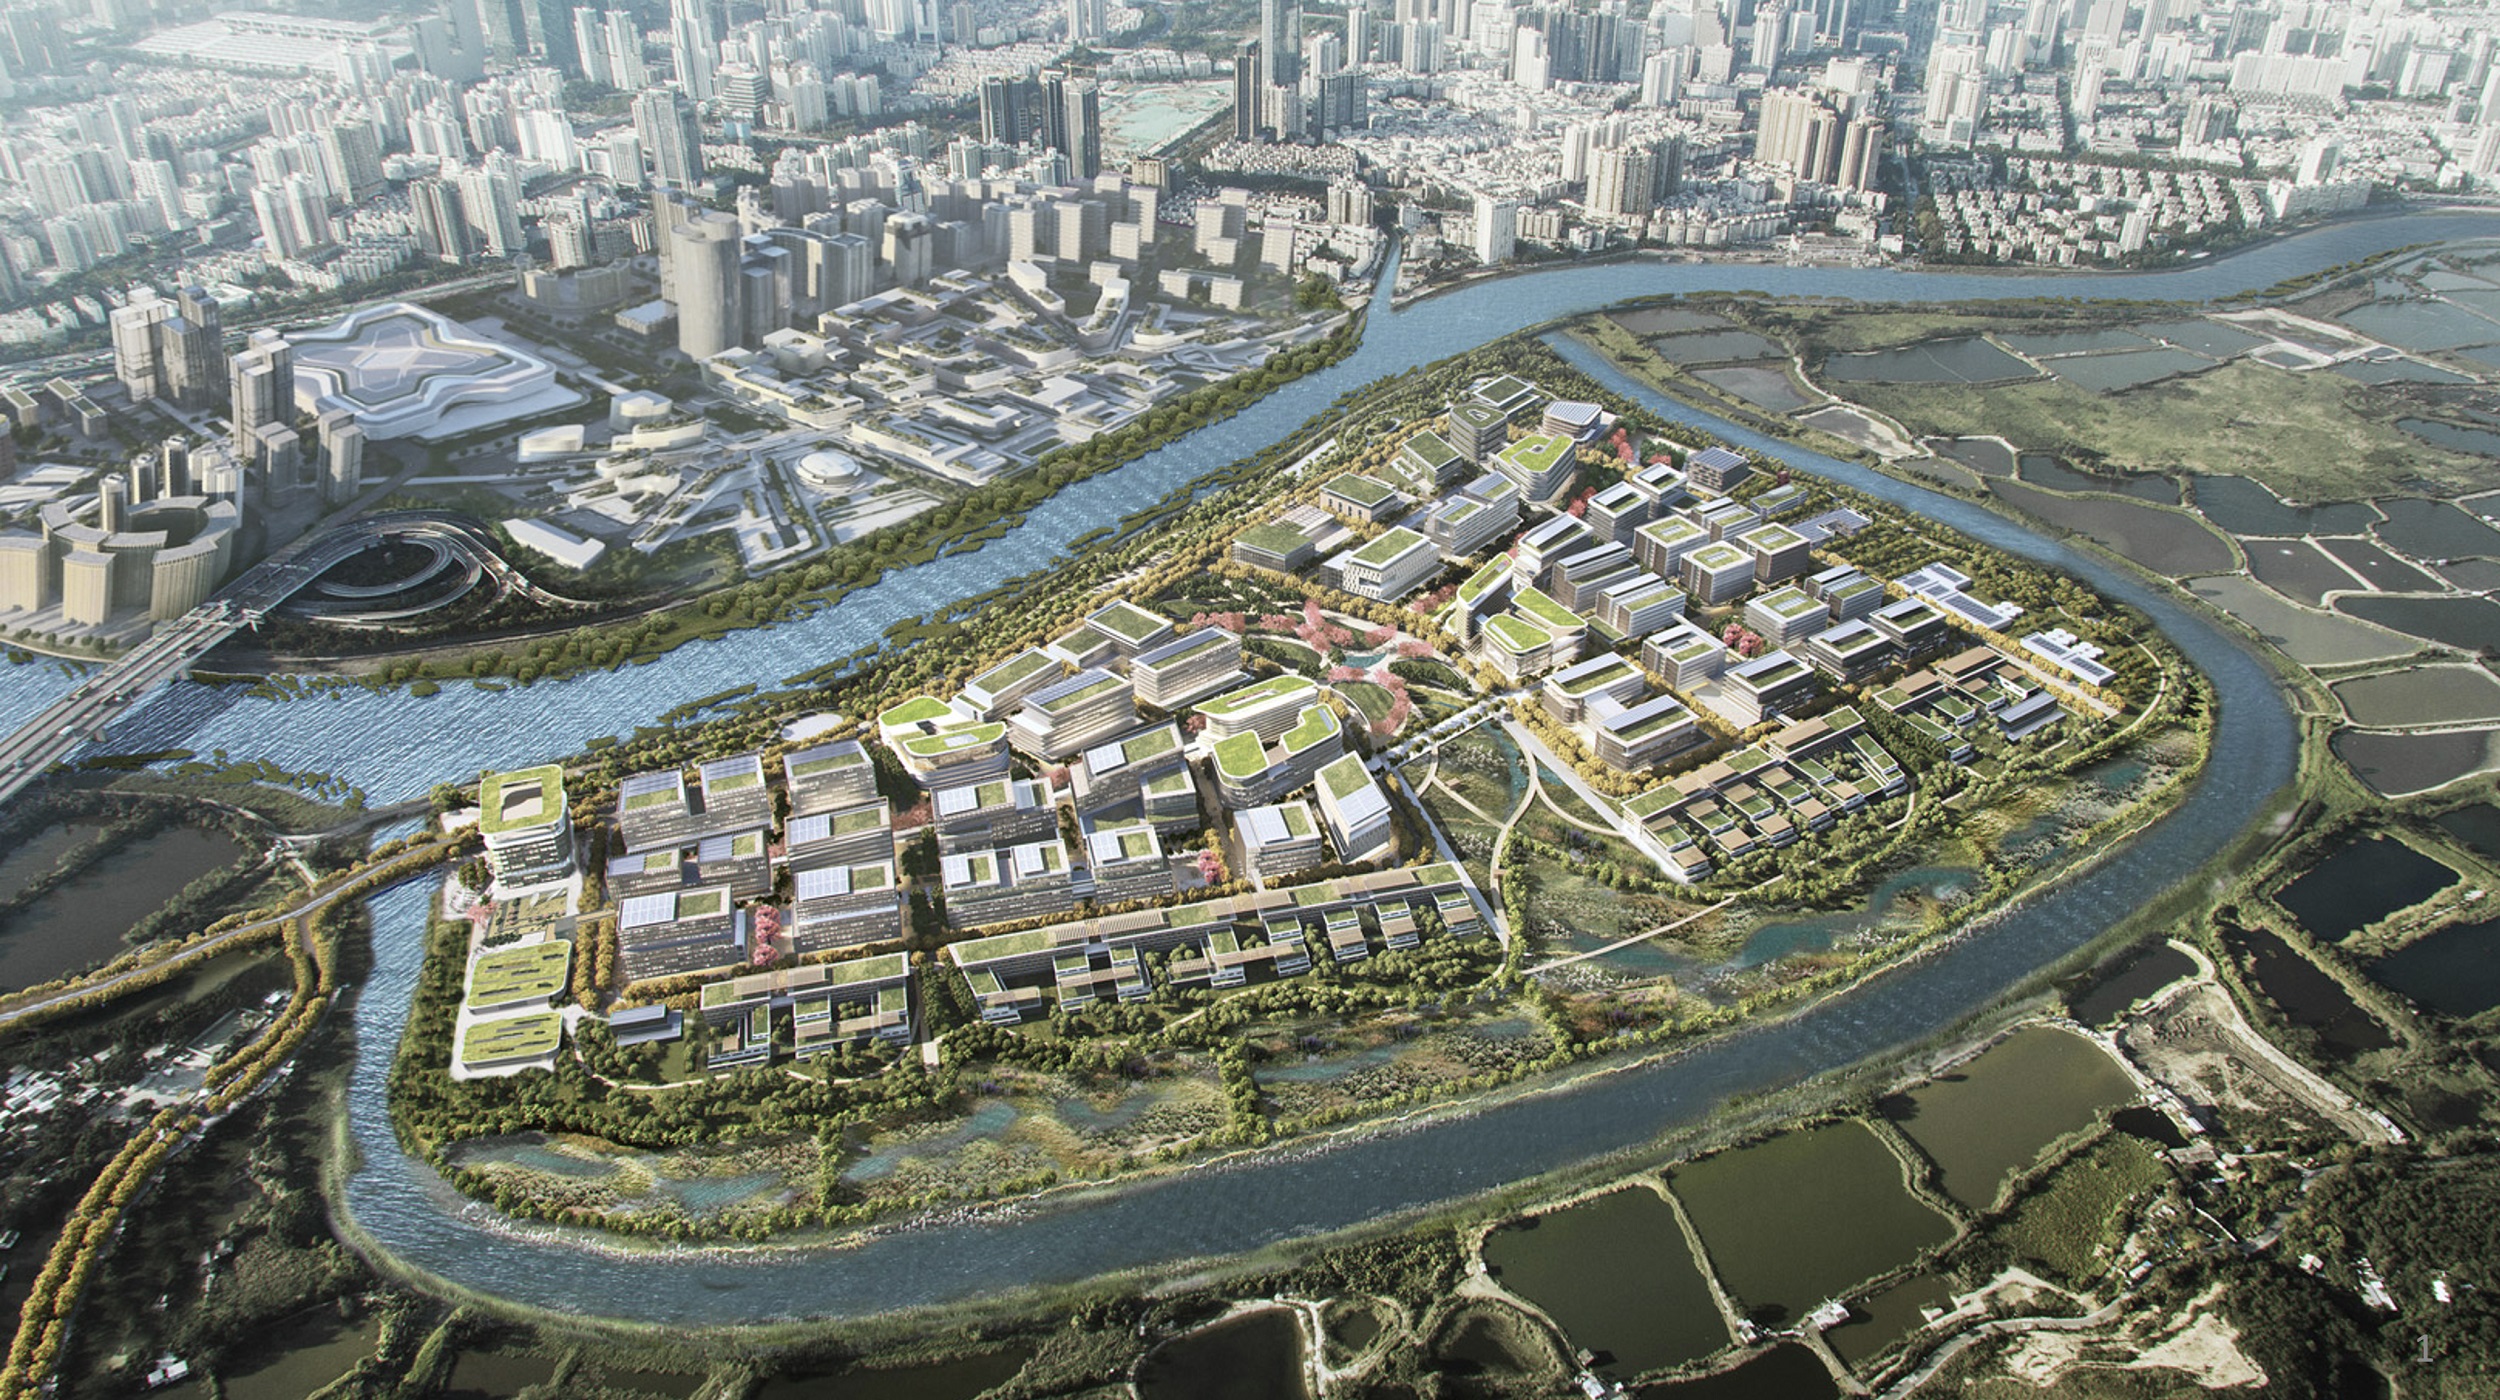 Hong Kong-Shenzhen Innovation and Technology Park aims to develop Lok Ma Chau Loop into a resource efficient, low-carbon, and climatic resilient district in a smart, green and resilient approach to achieve a sustainable future-proofing city.